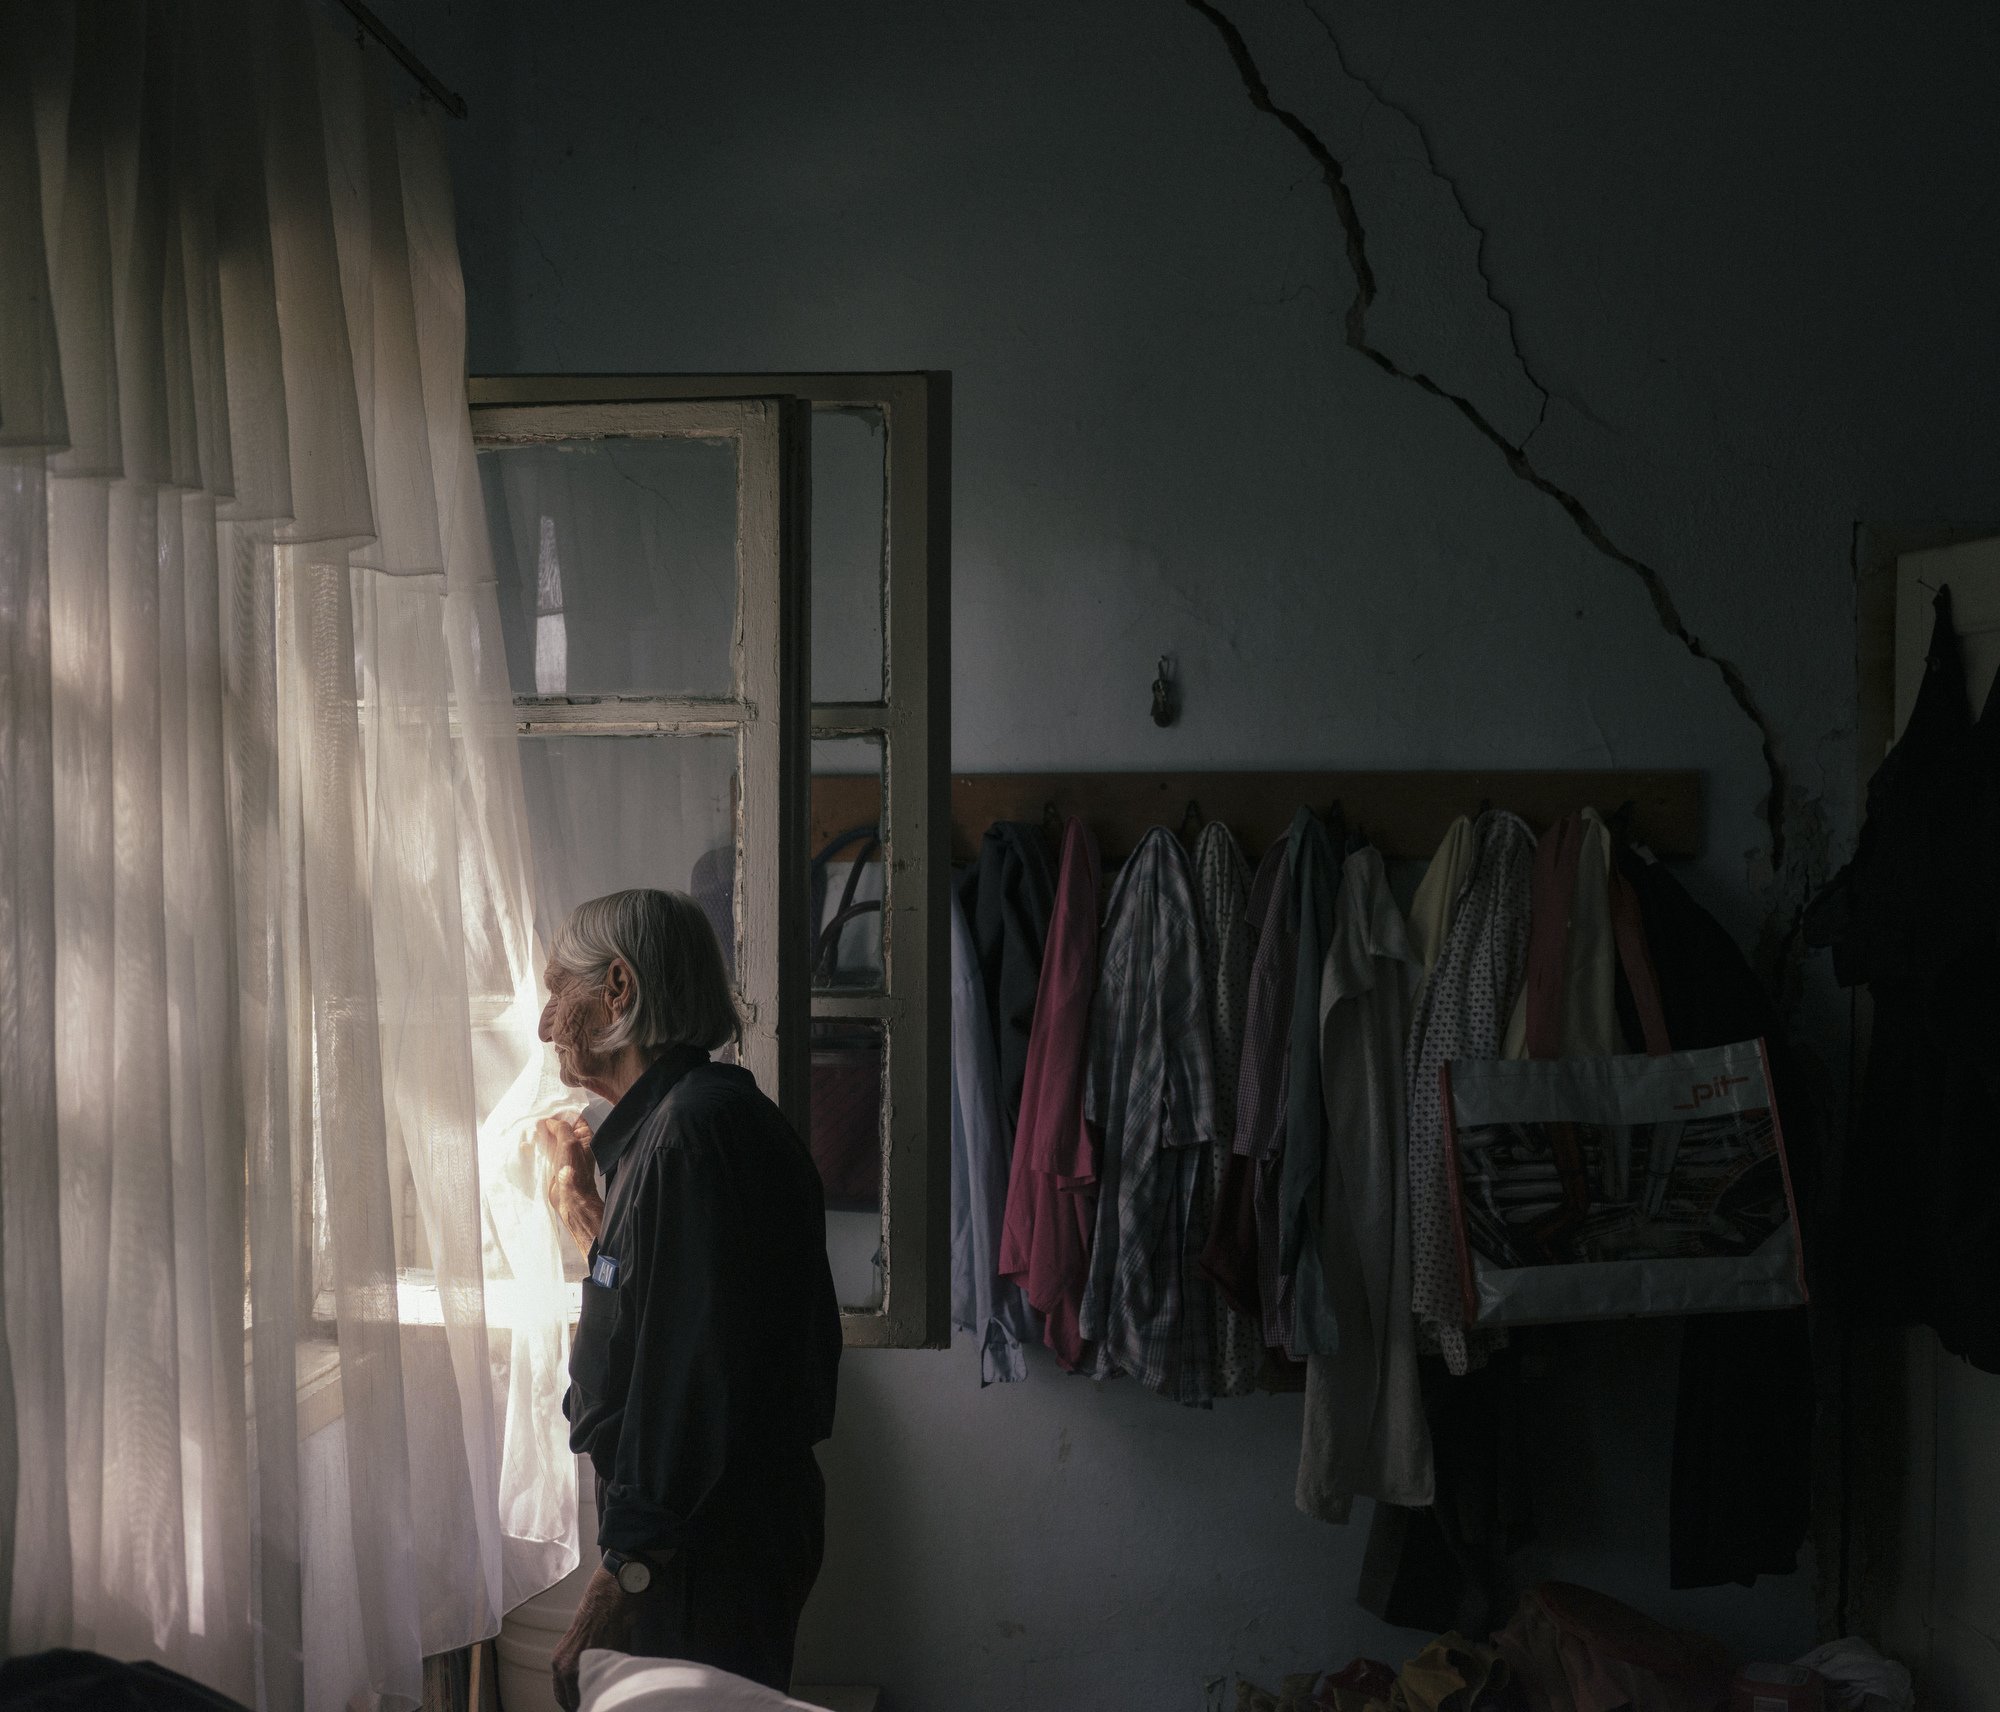  MINES IN JAMA. Portrait of Roksanda Tasic, 84 old, she lives in poor neighborhood of Bor, approx. 5-10 minutes from the city centre of Bor. Roksanda lives in a small house with a lot of apparent cracks in the walls of the house, which she says is fr